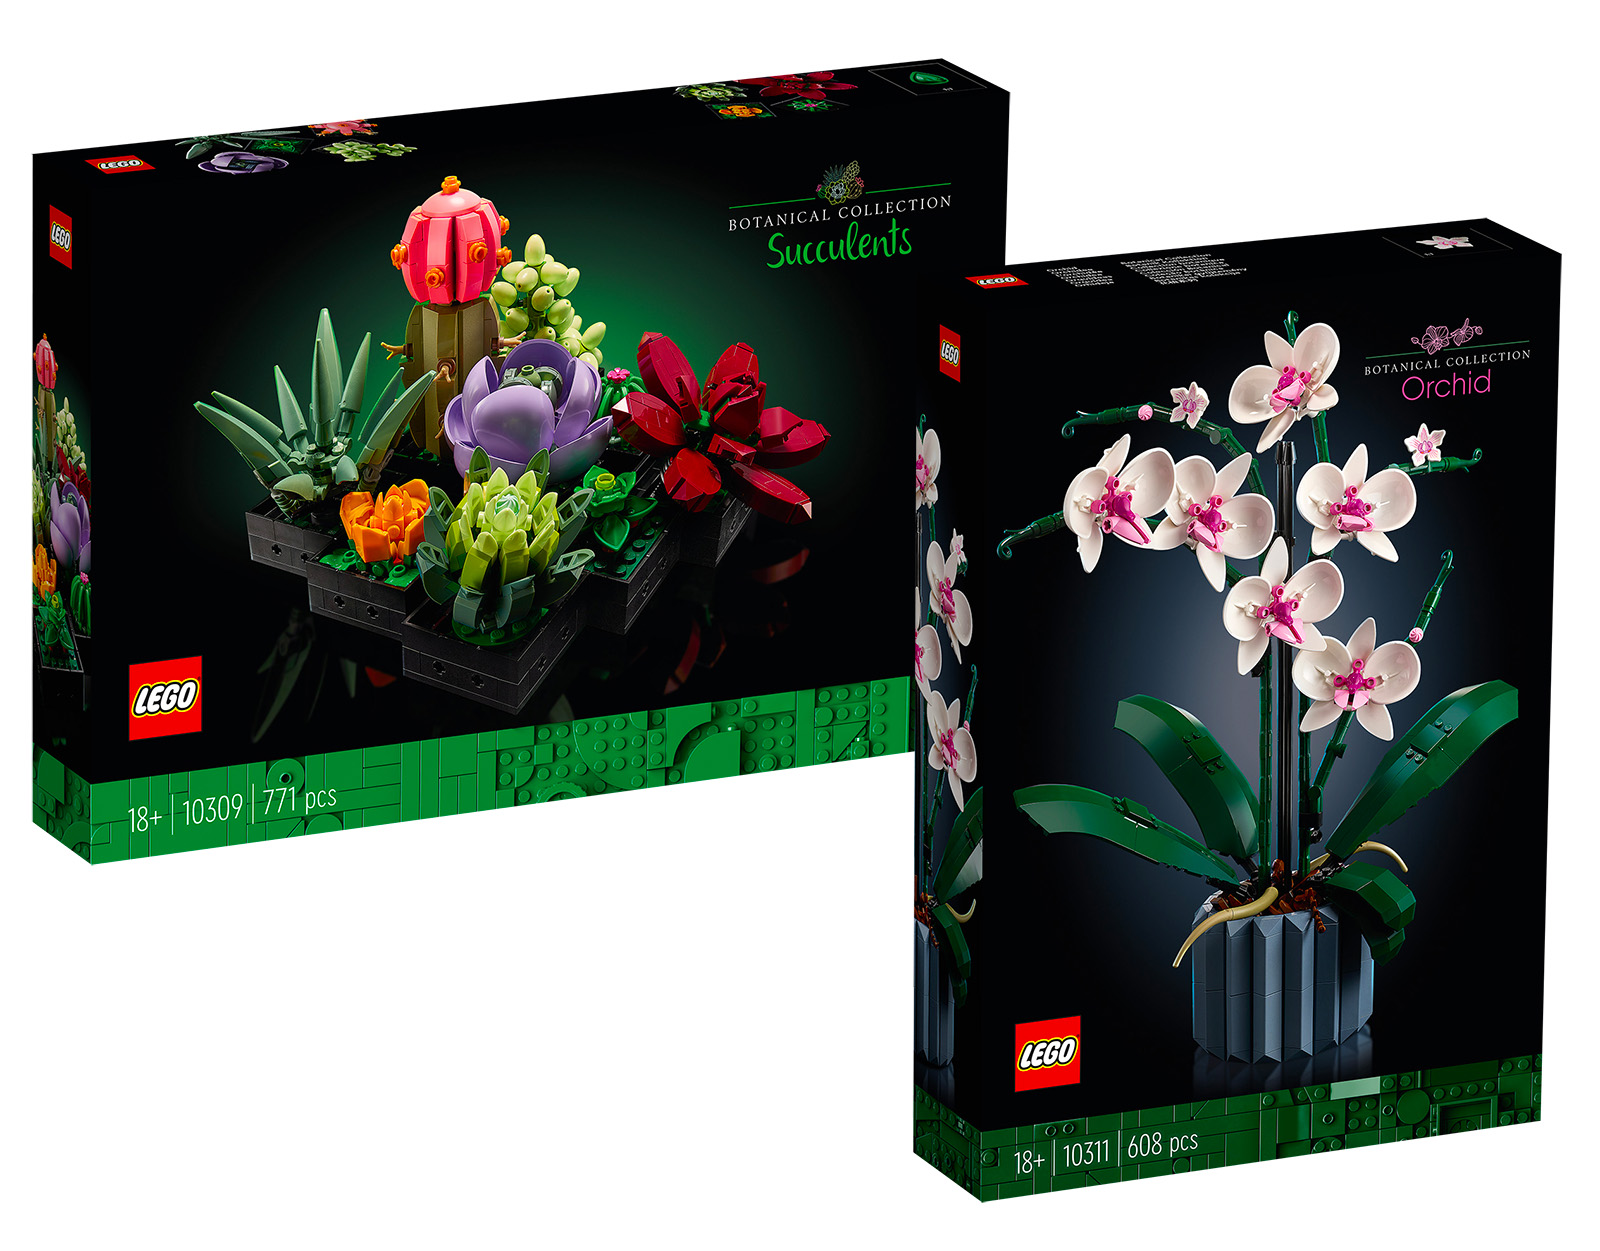 https://www.hothbricks.com/wp-content/uploads/2022/04/10309-10311-lego-botanical-collection-orchid-succulents.jpg